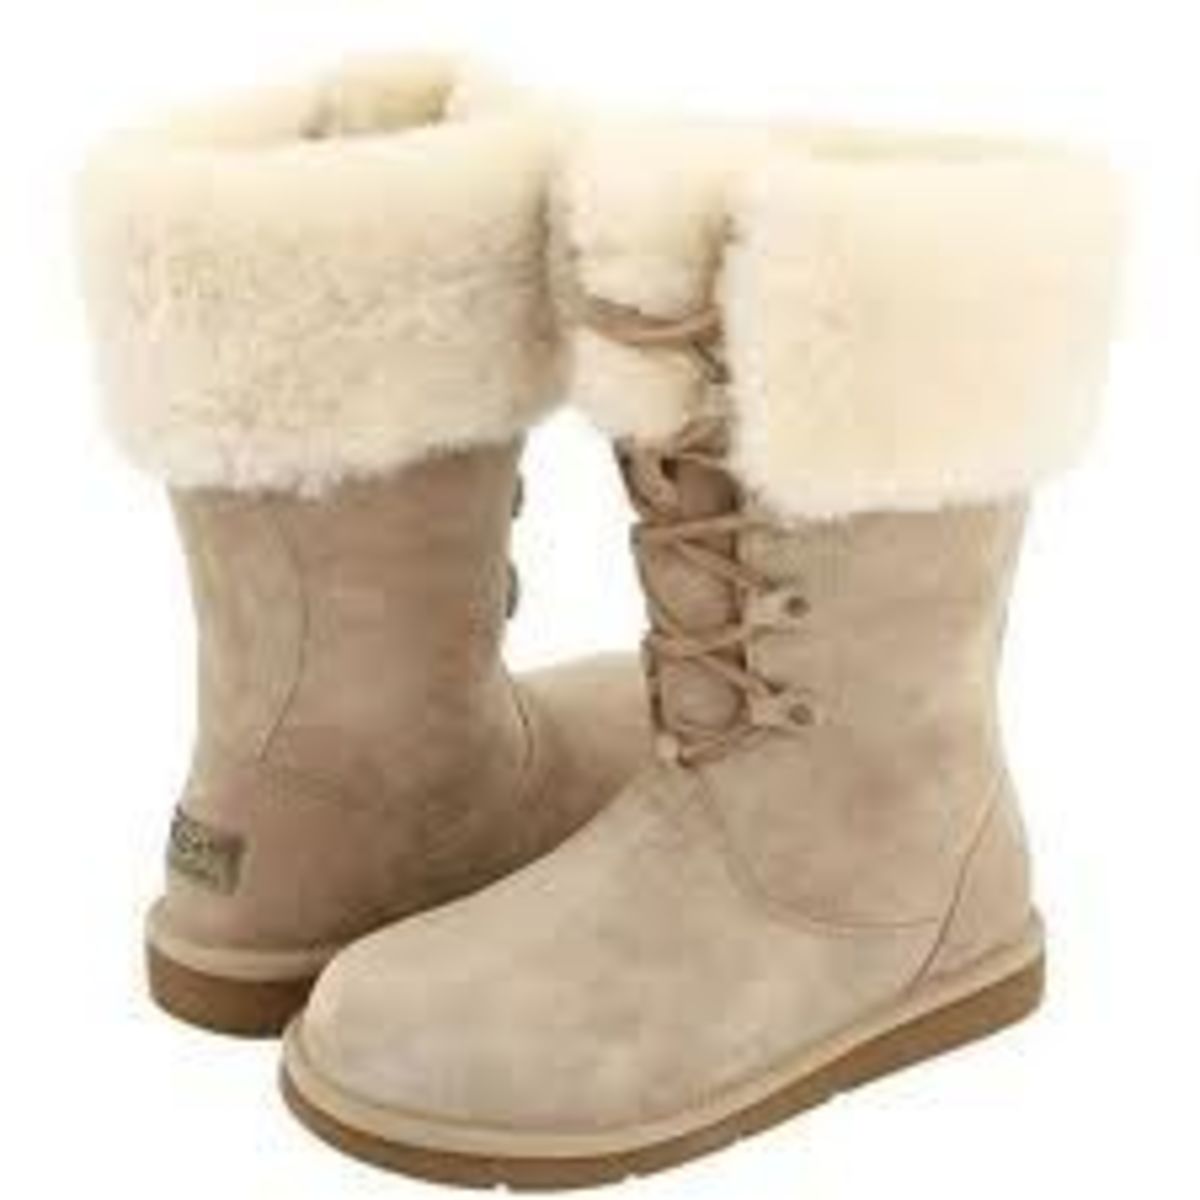 How To Clean Uggs Without Ruining Them Hubpages